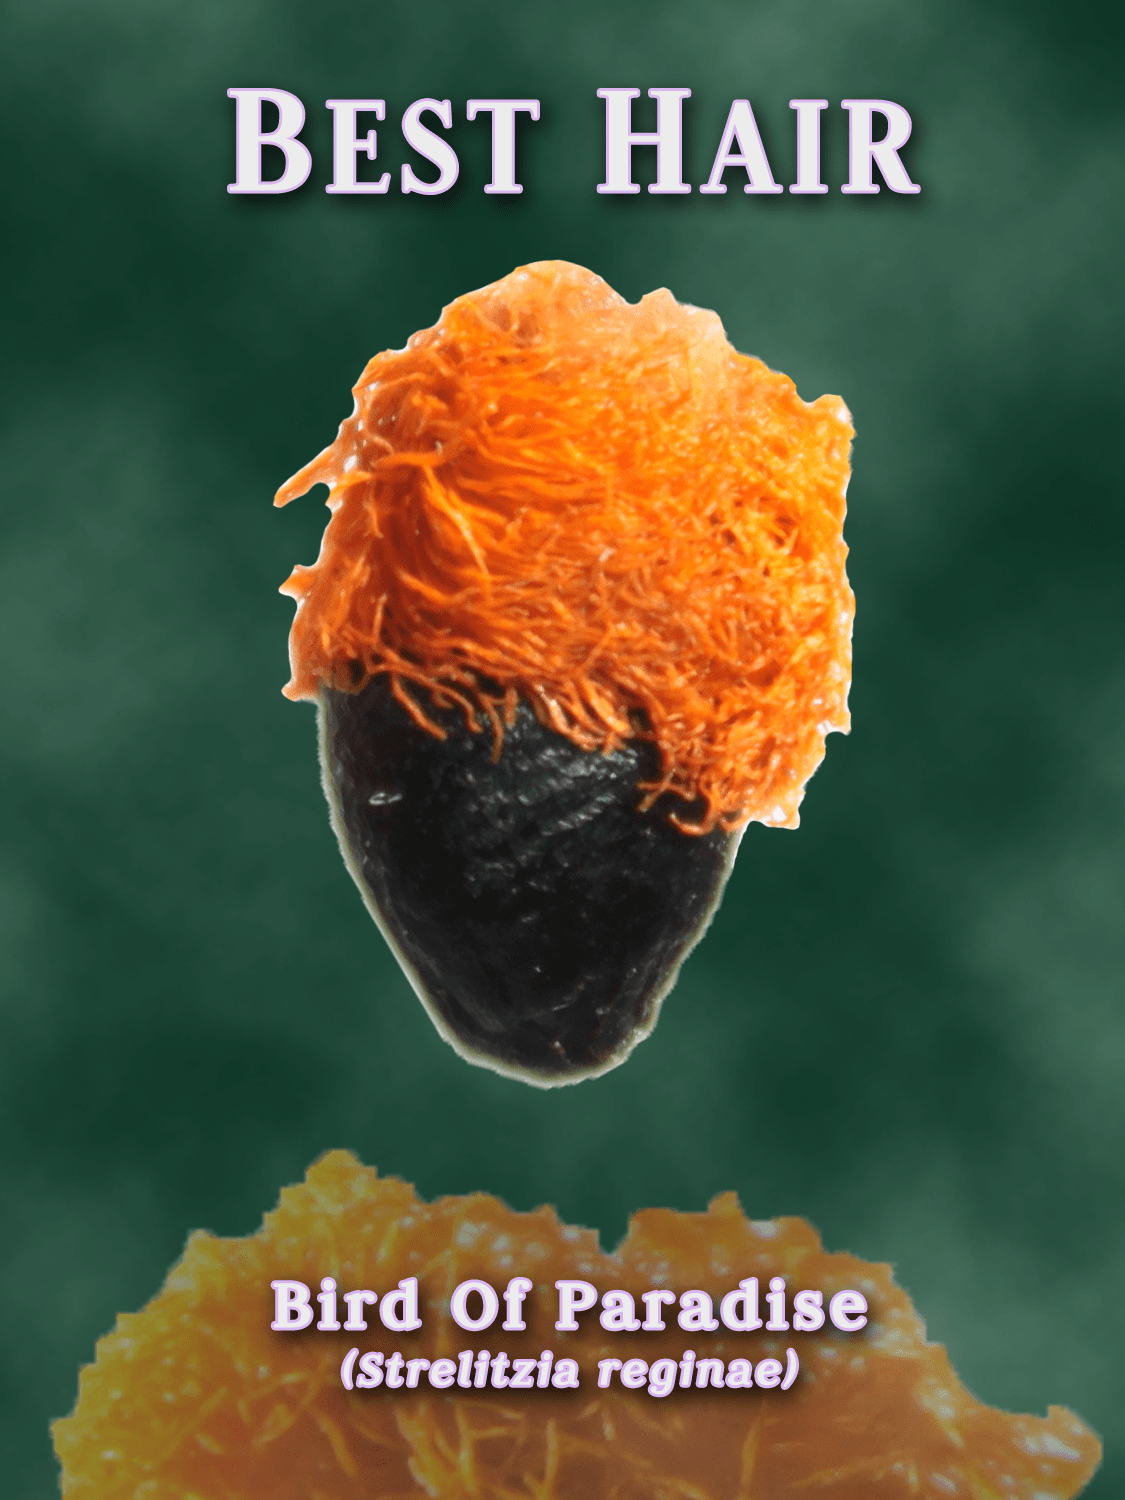 yearbook style portrait of the bird of paradise seed which has bright orange arils on top of the dark black seed